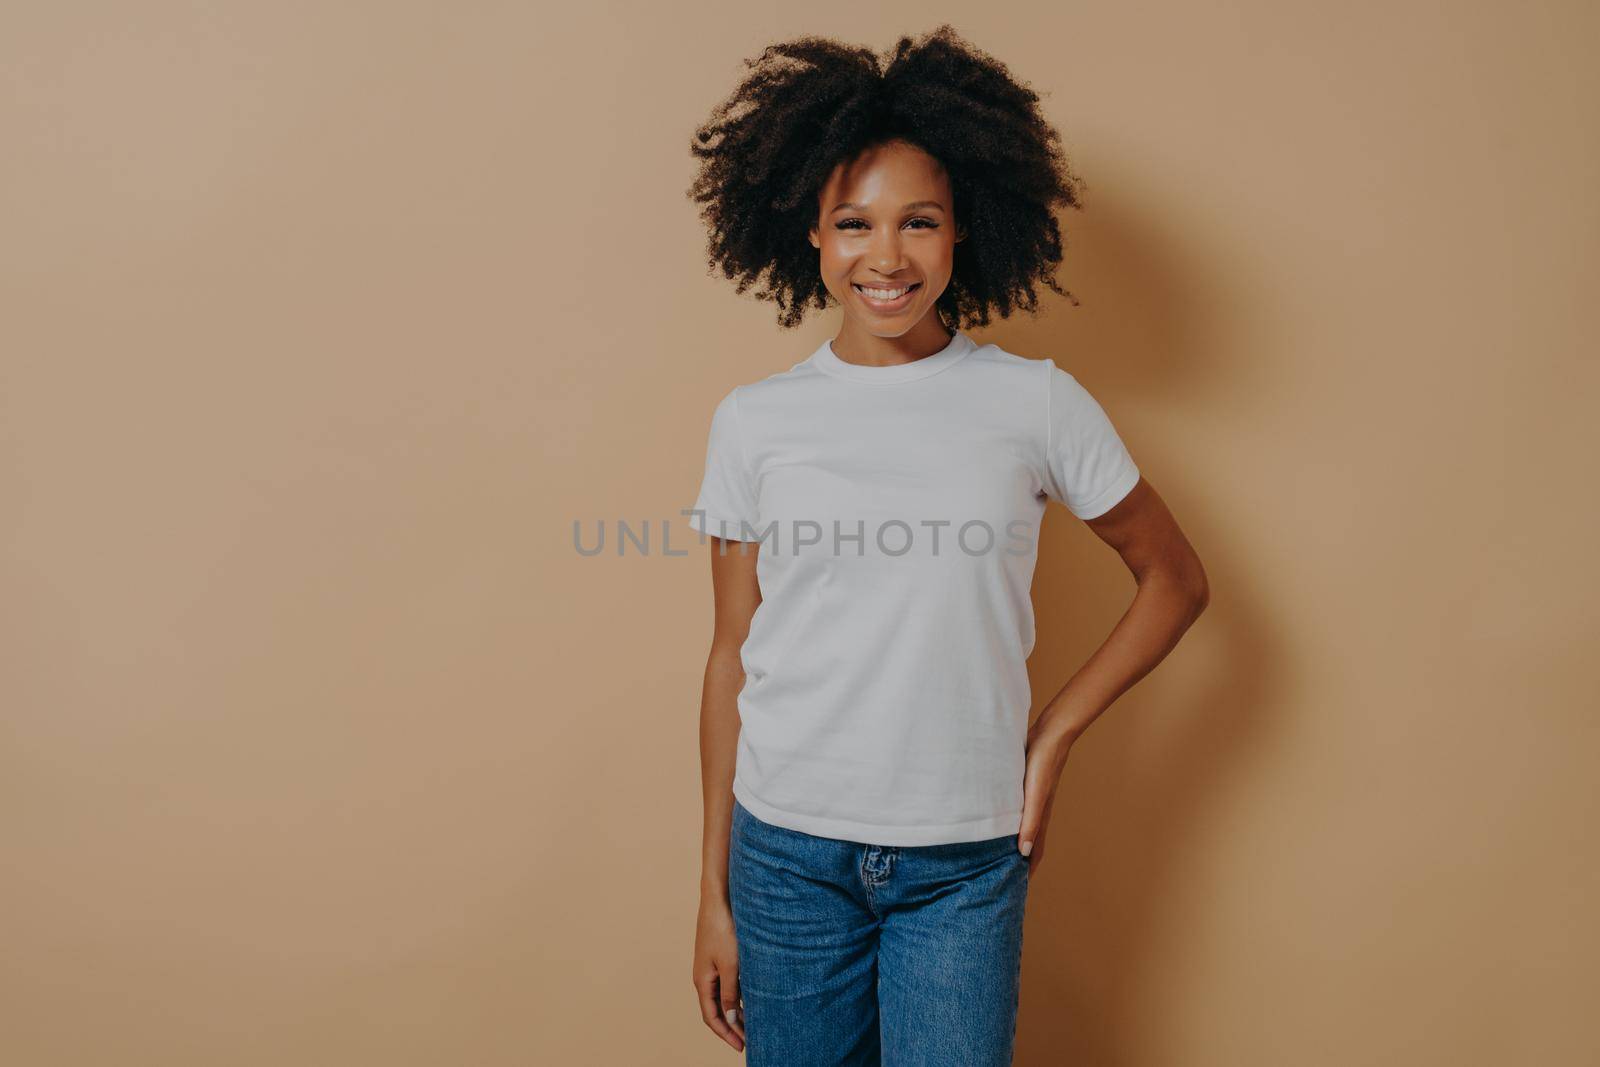 Beautiful cheerful dark skinned woman in casual outfit smiling at camera, cheerful african female in white tshirt and jeans expressing positive emotions, posing against beige background in studio